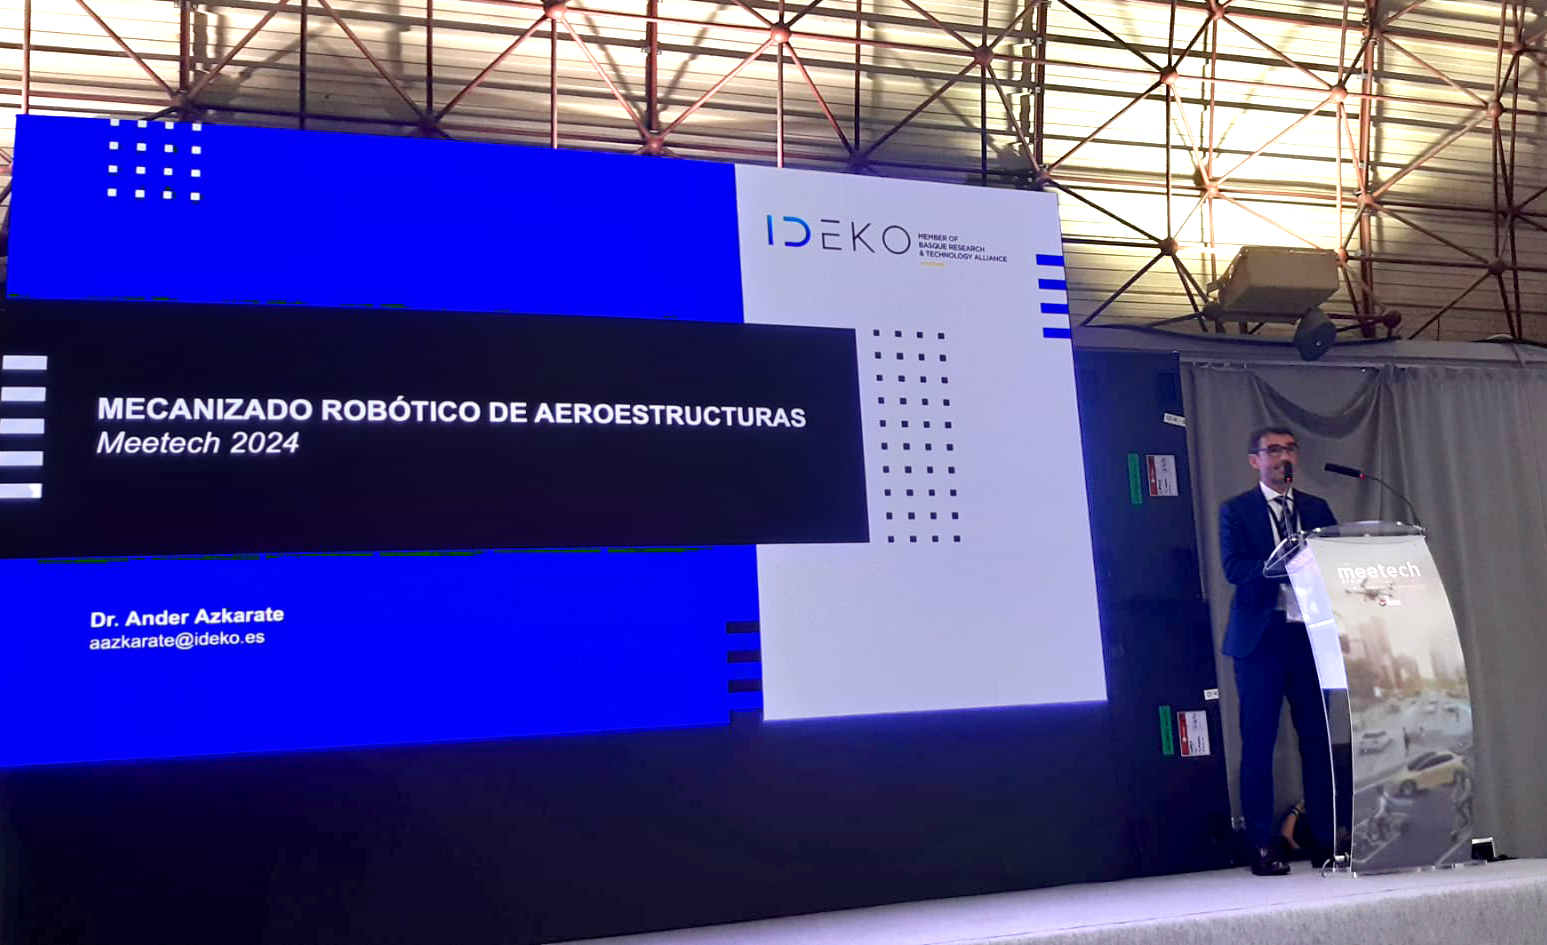 IDEKO showcases at MeetechSpain how to accelerate and optimize the manufacturing of aeronautical components.